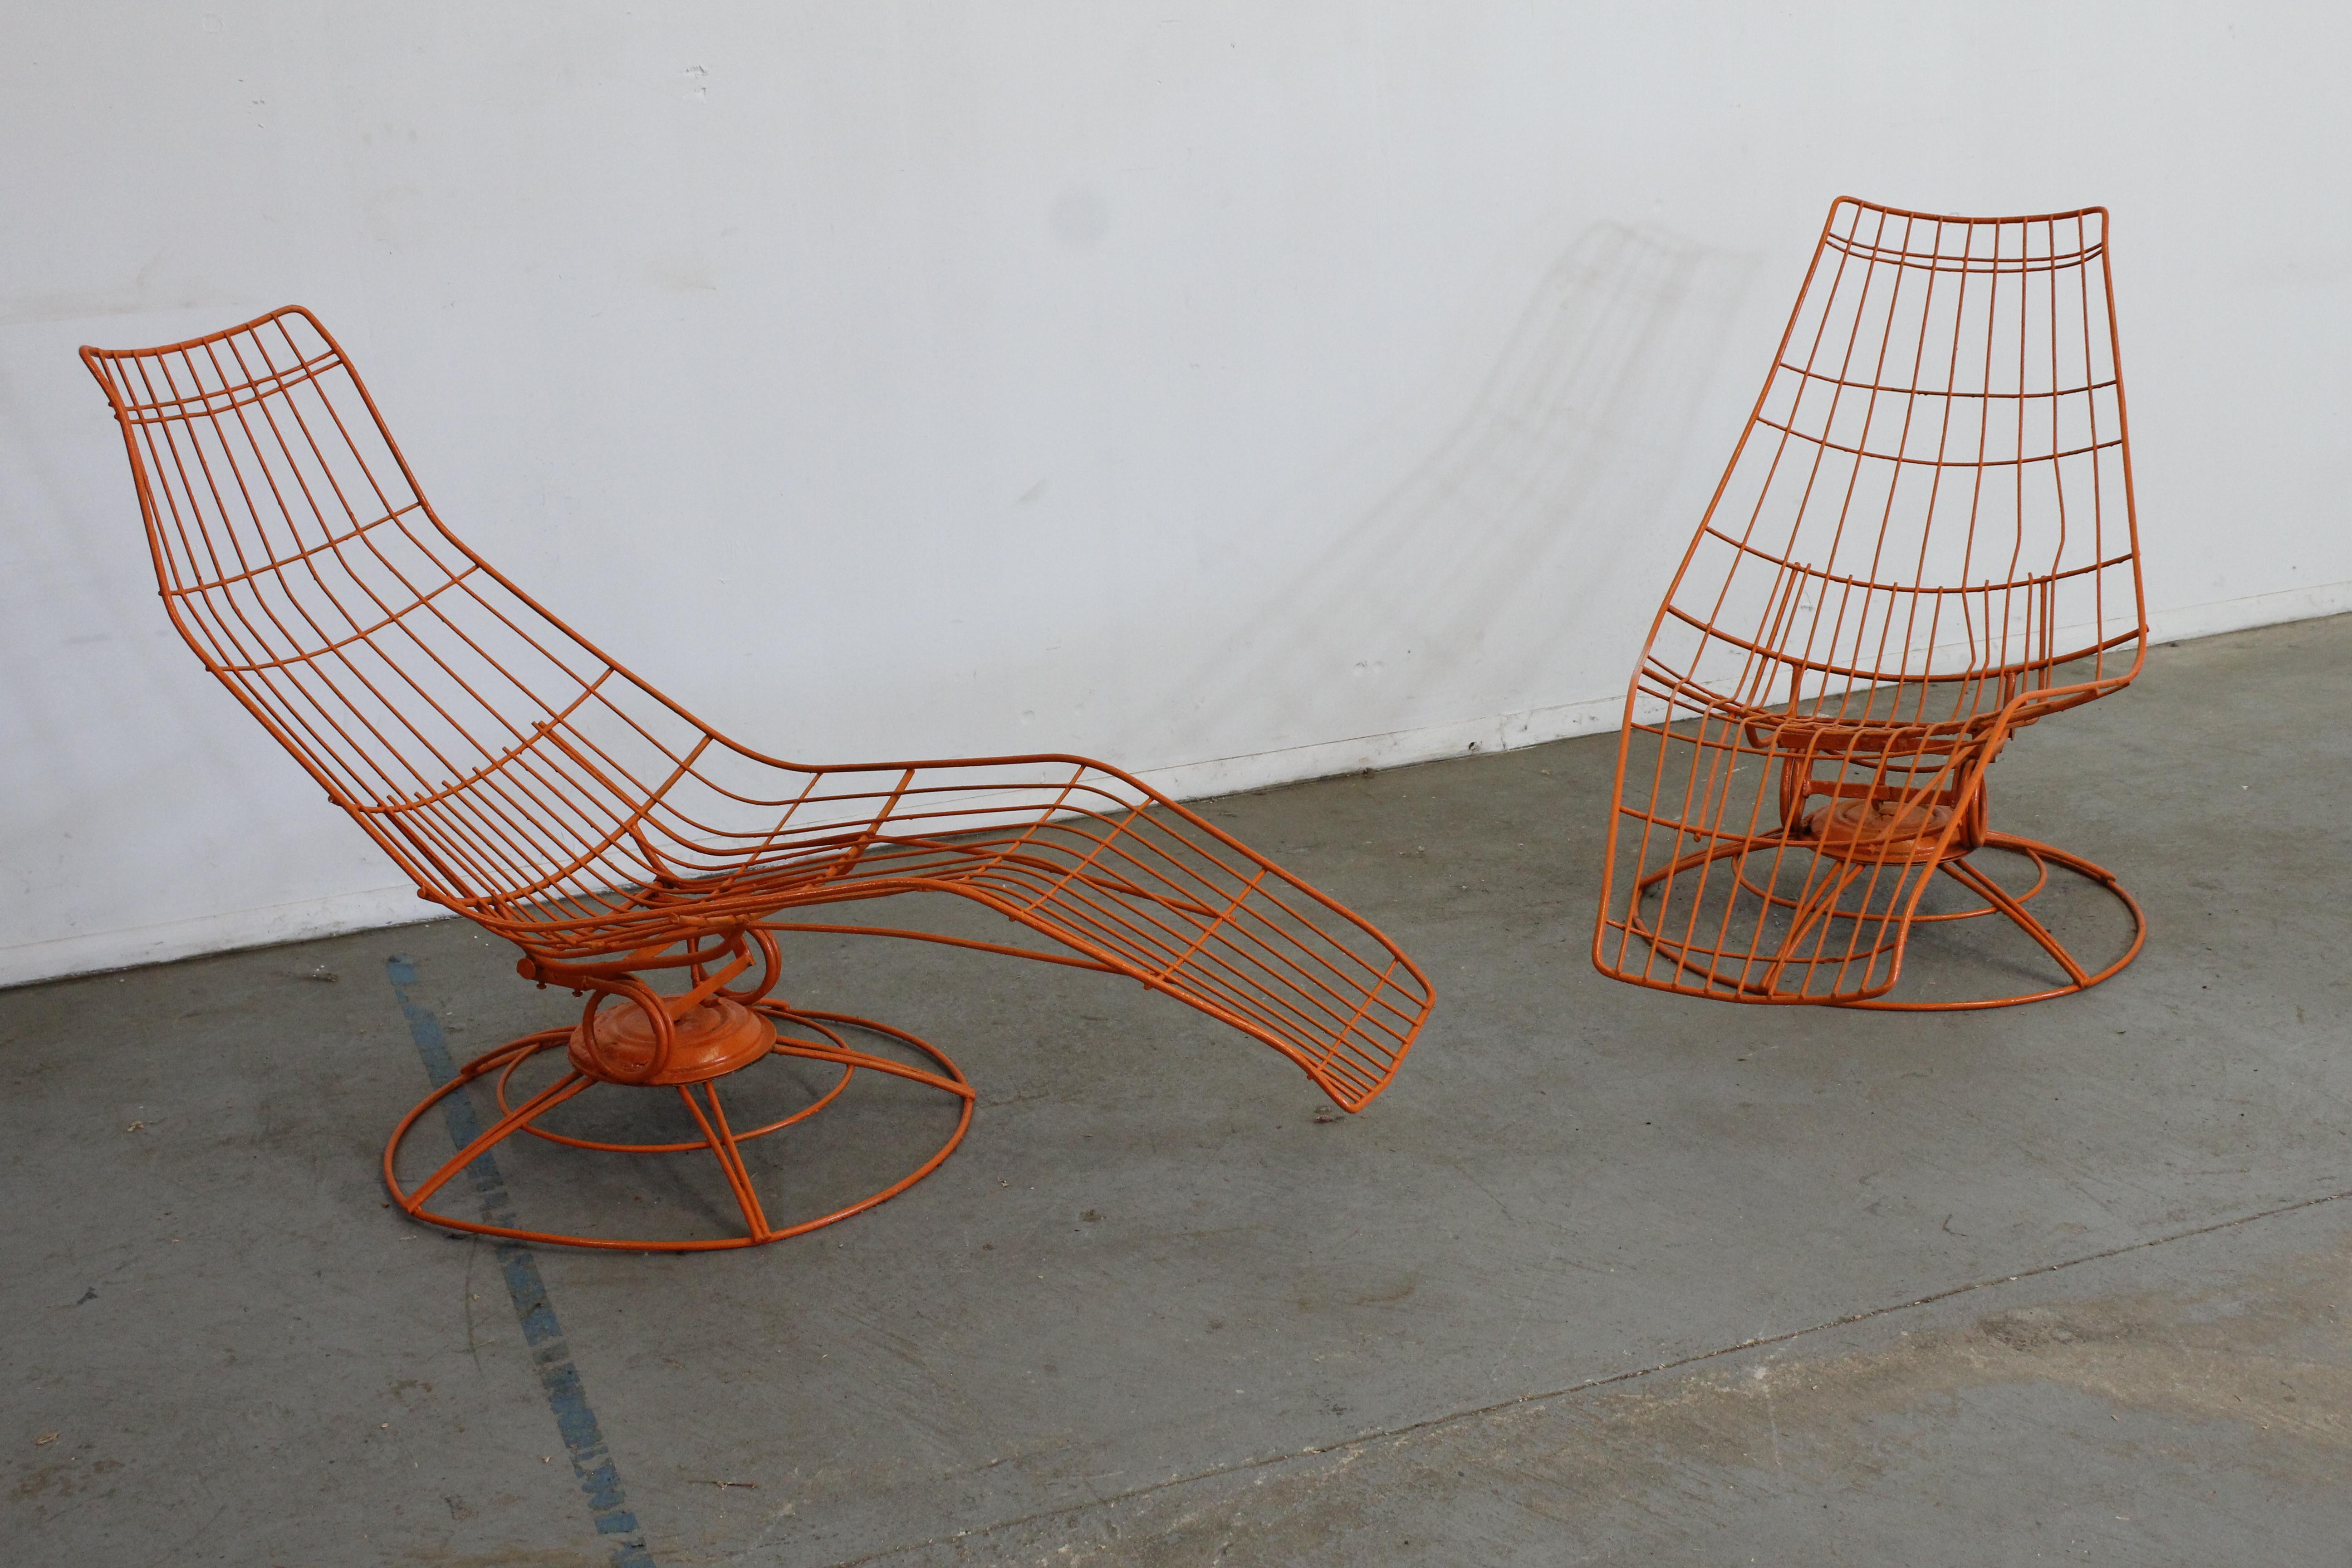 What a find. Offered is a pair of vintage Mid-Century Modern high-back Riviera Siesta Rocker patio lounge chairs (model 36) made by Homecrest, circa 1965. These chairs ONLY rock, and have been repainted in an atomic orange. They're in good condition